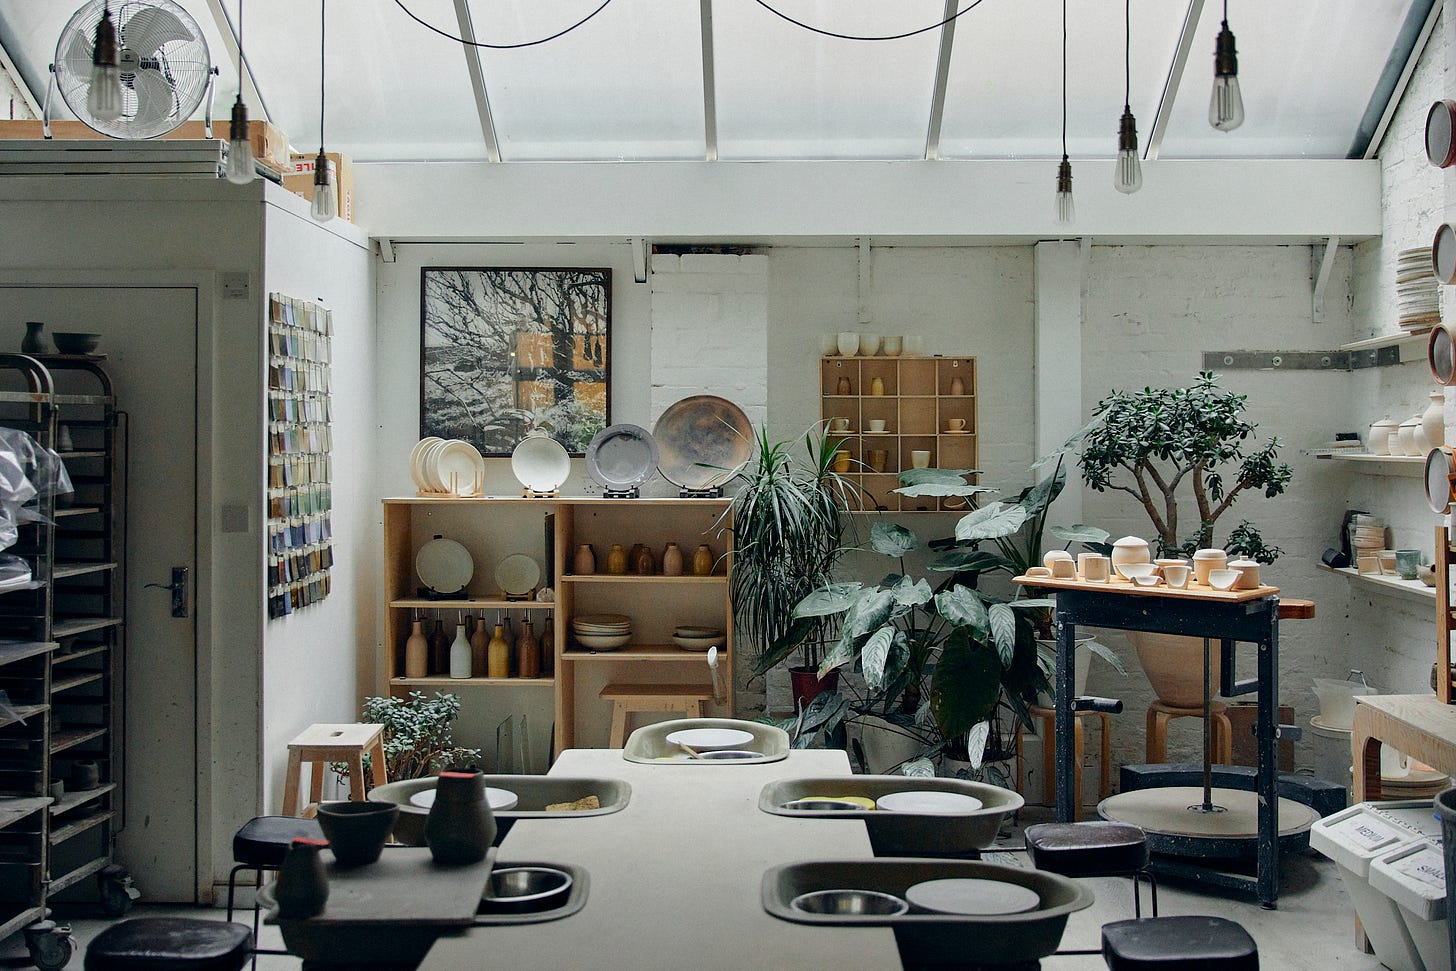 Inside a ceramics studio. A large table runs through the centre foreground with pottery wheels. Plants along the back wall, shelves on all sides with display objects; bowls, plates, vessels. A roof light at the top letting in soft light. A picture on the back wall of trees in winter.